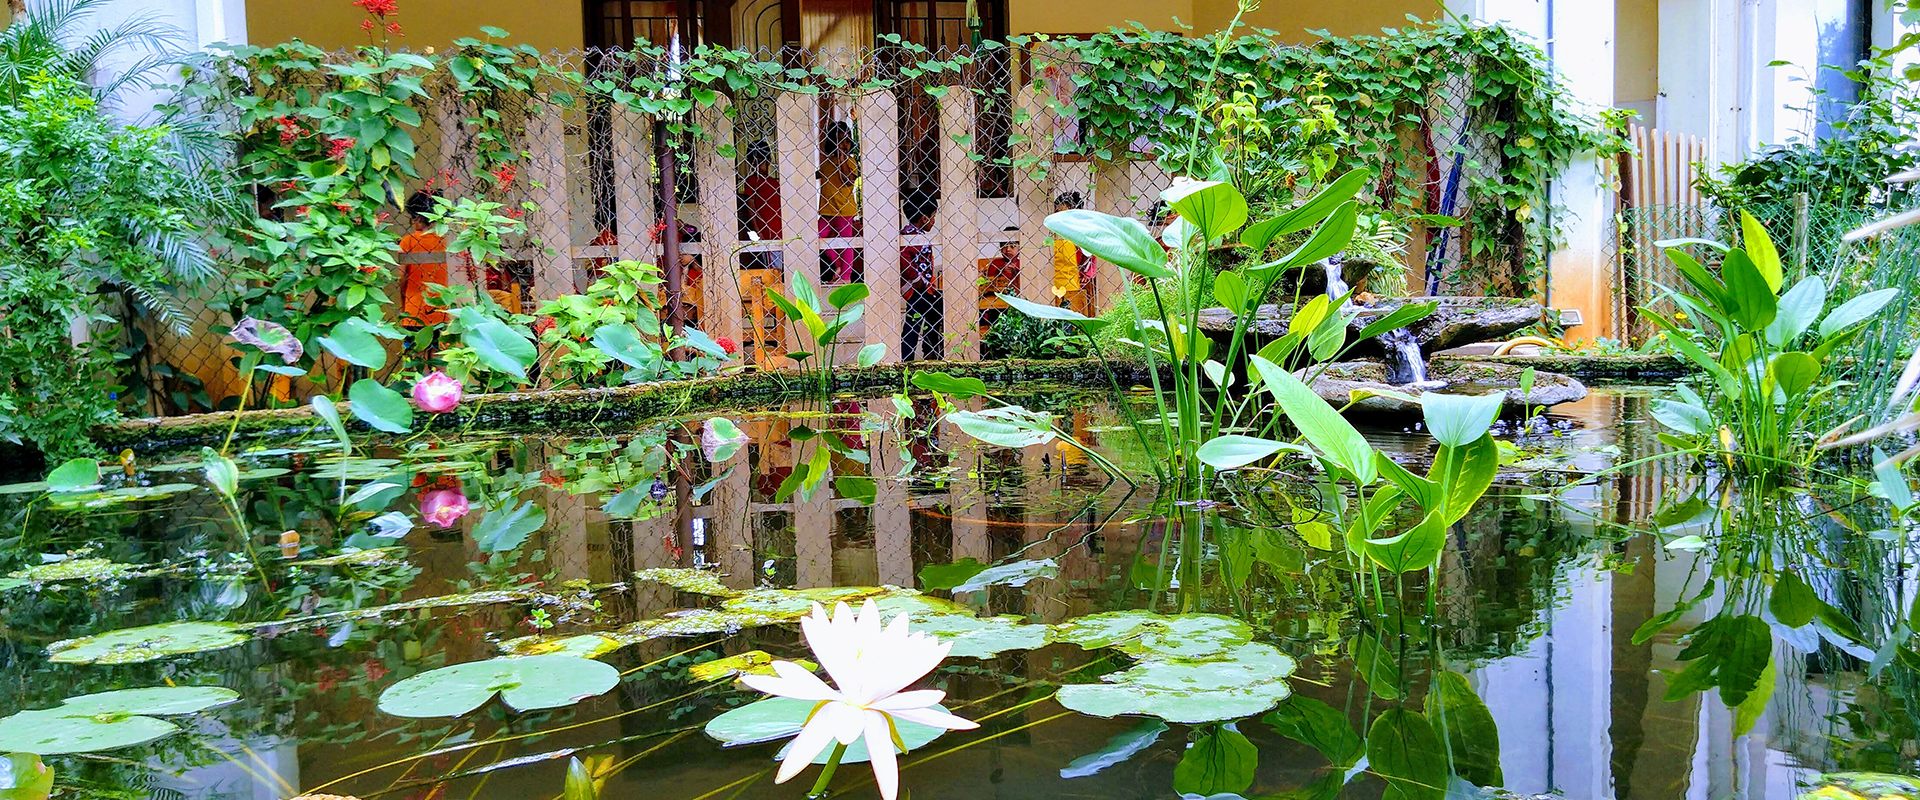 A pond with lotuses and other aquatic plants, separated by a fence from the school building beyond.